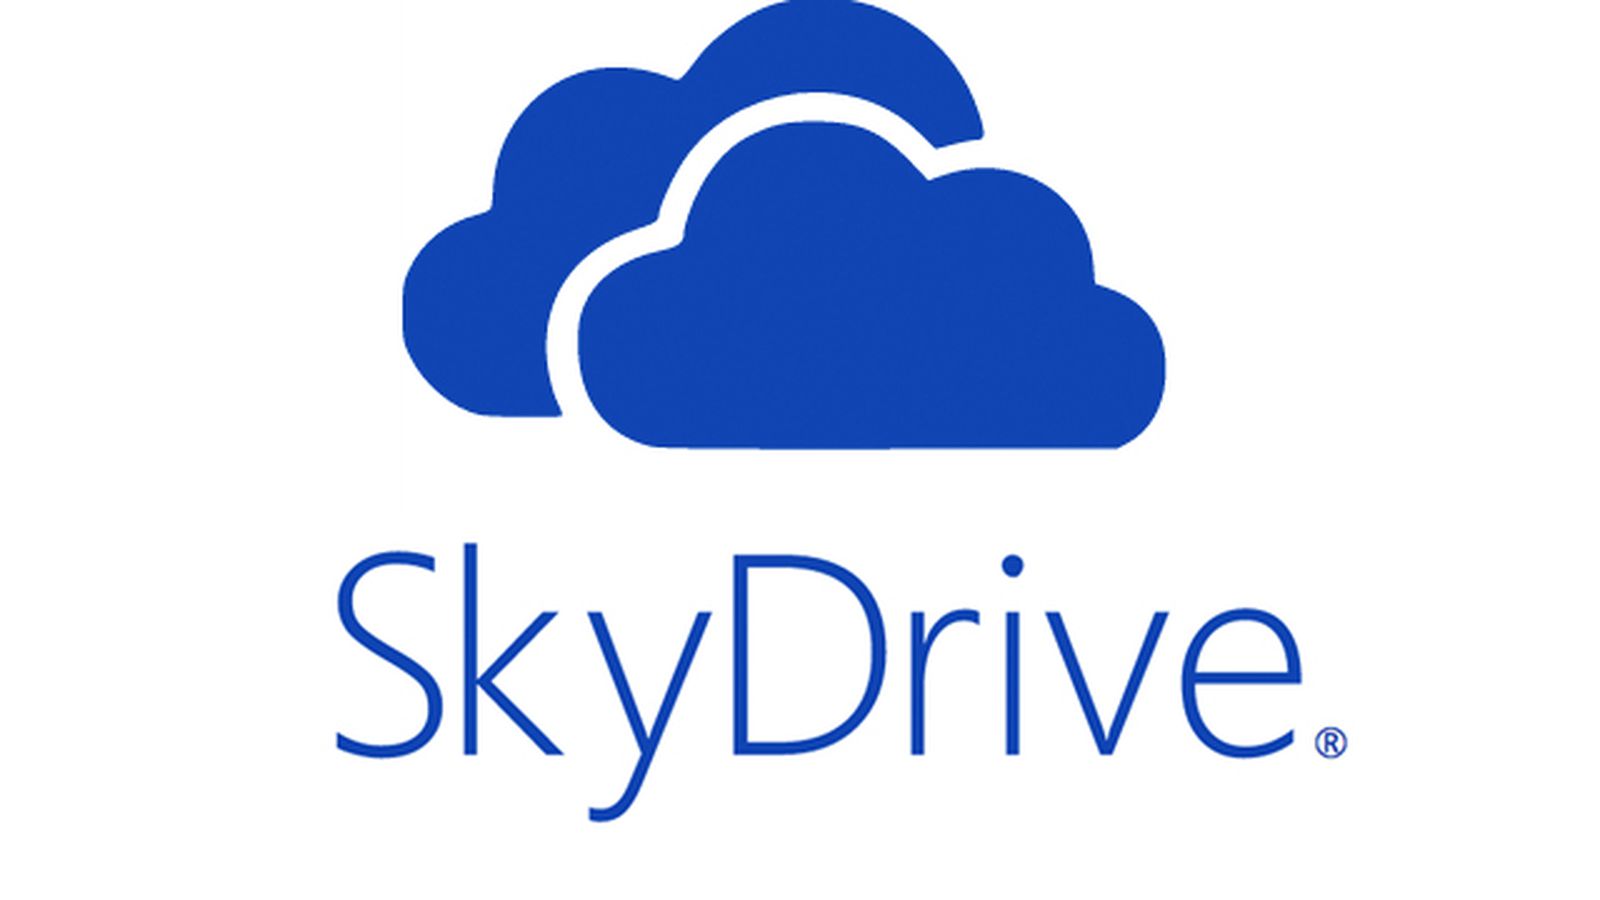 Microsoft Forced To Rename Skydrive Following Trademark Case With